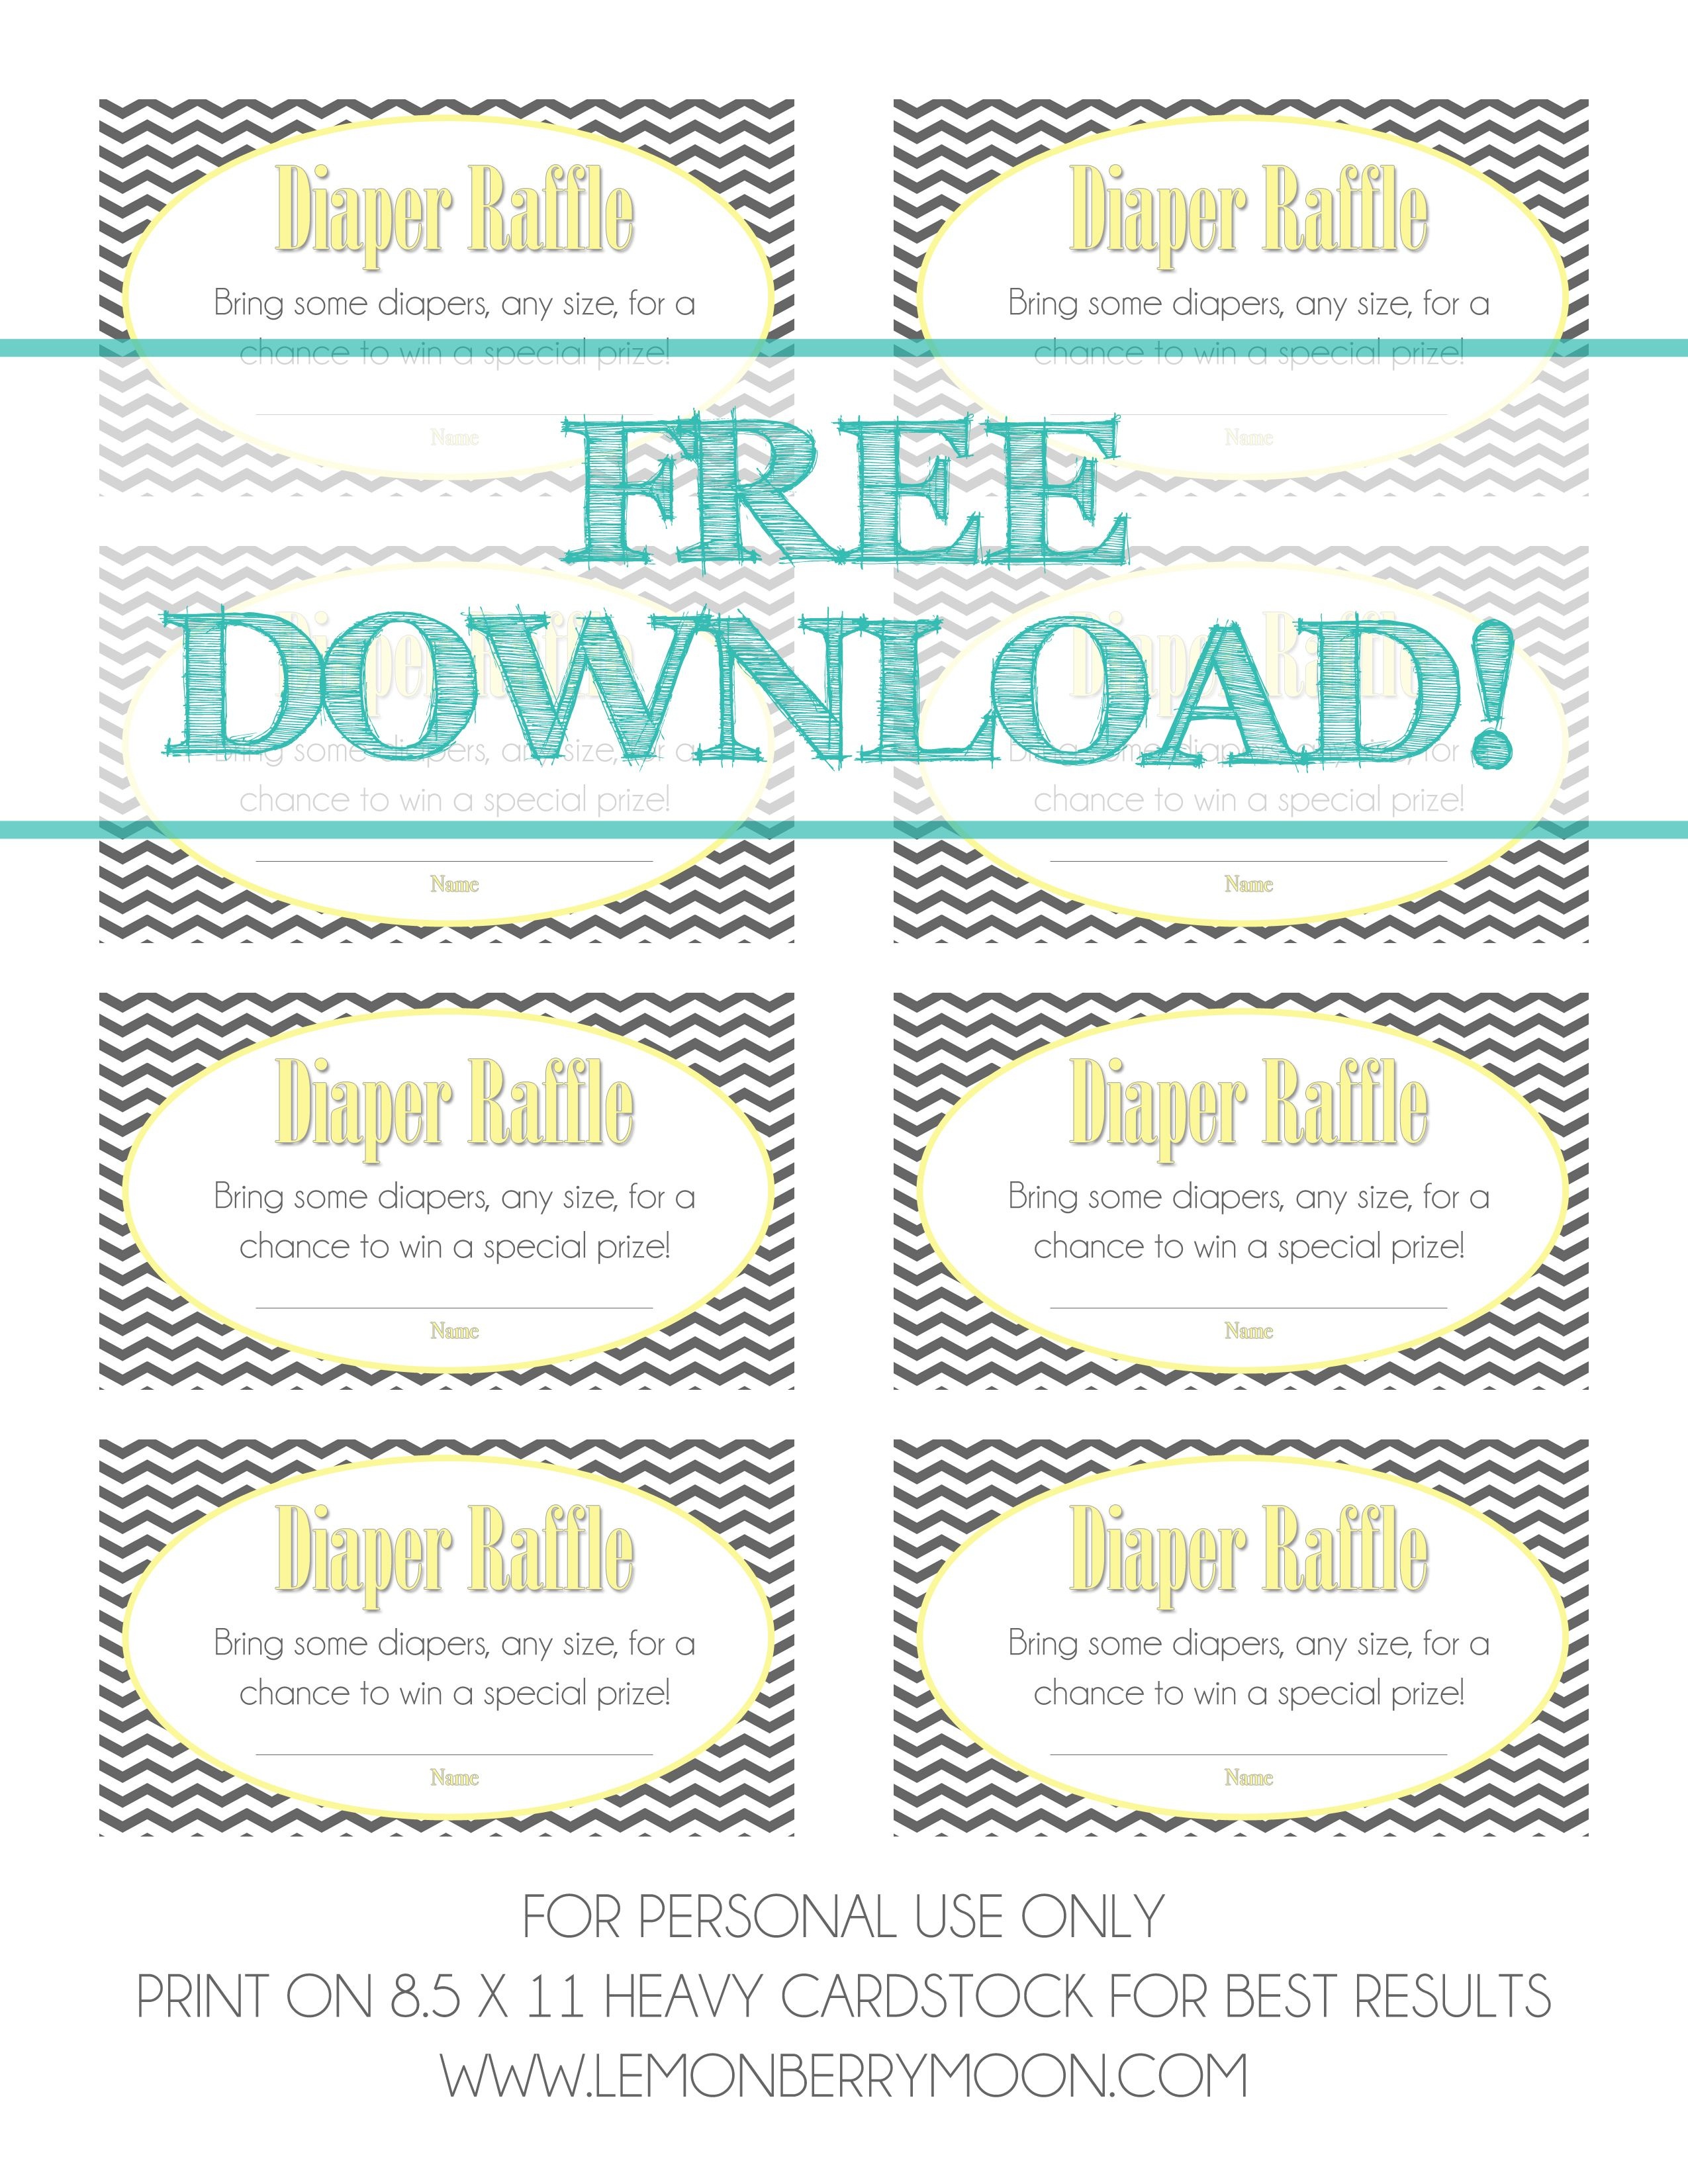 Free Download - Baby Diaper Raffle Template | Baaby Shower | Baby - Free Printable Baby Shower Diaper Raffle Tickets